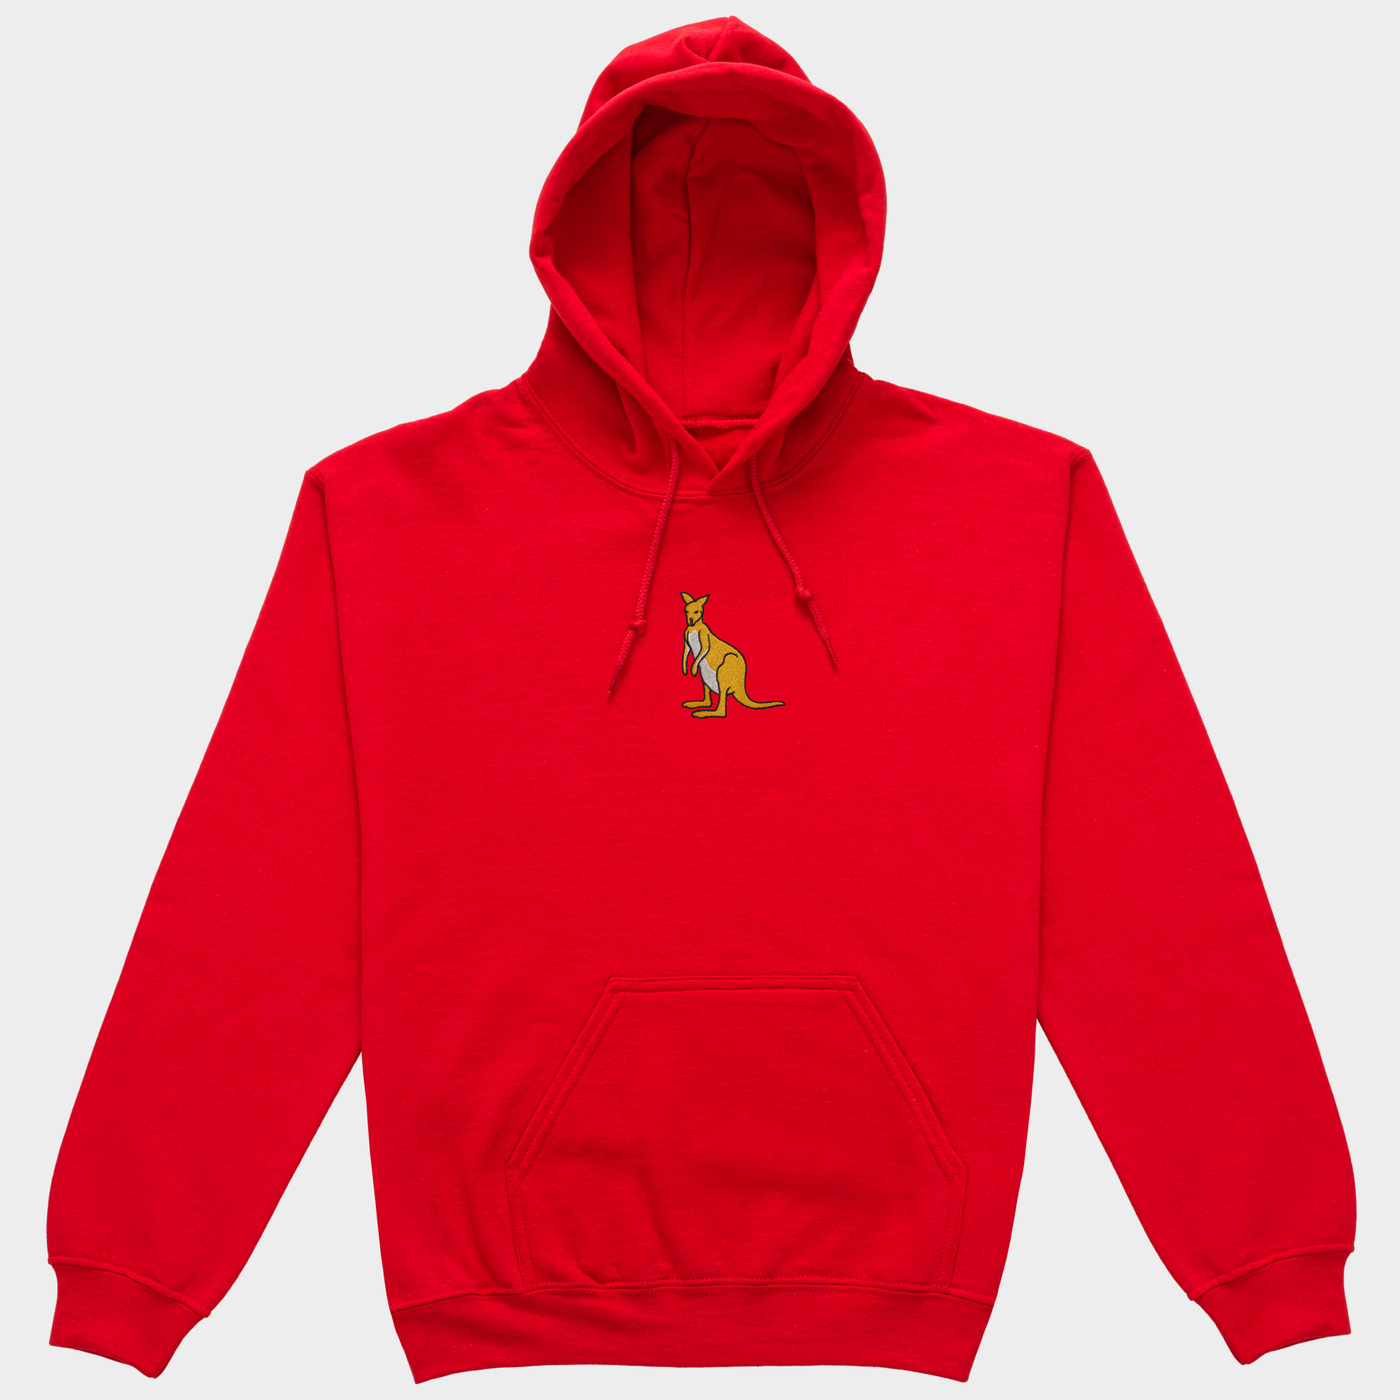 Bobby's Planet Women's Embroidered Kangaroo Hoodie from Australia Down Under Animals Collection in Red Color#color_red